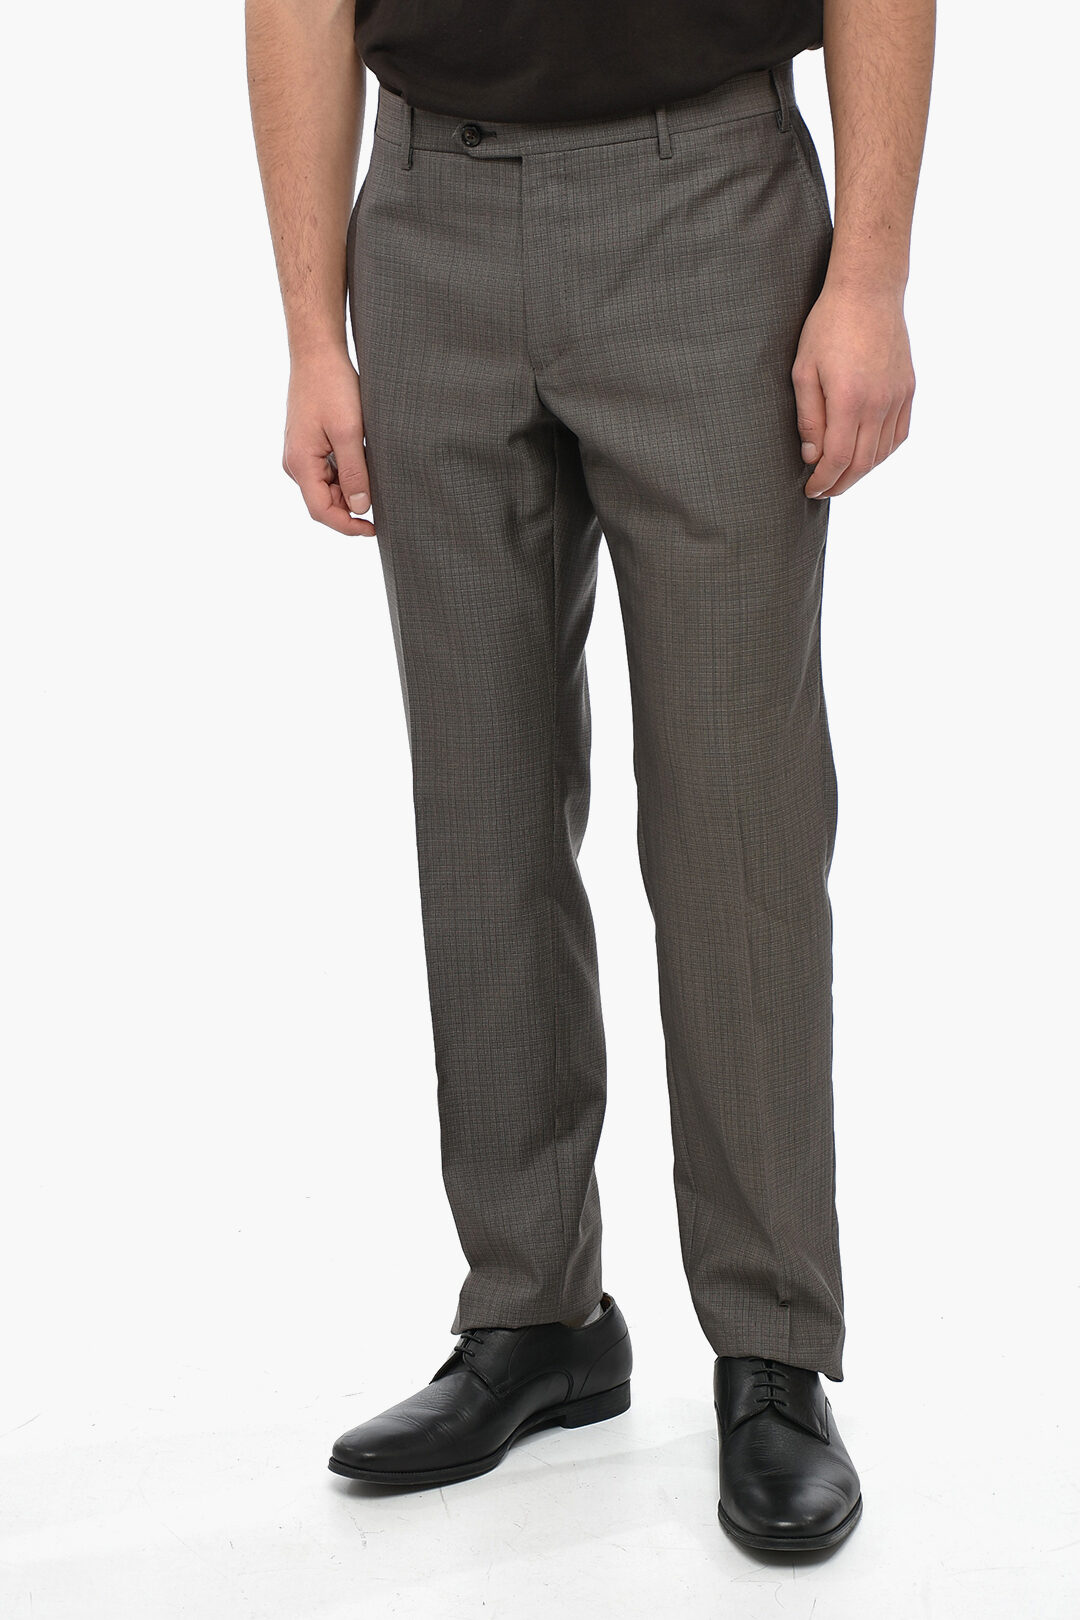 Corneliani Wool and Silk Blend ACADEMY SOFT Suit with Mini Check ...